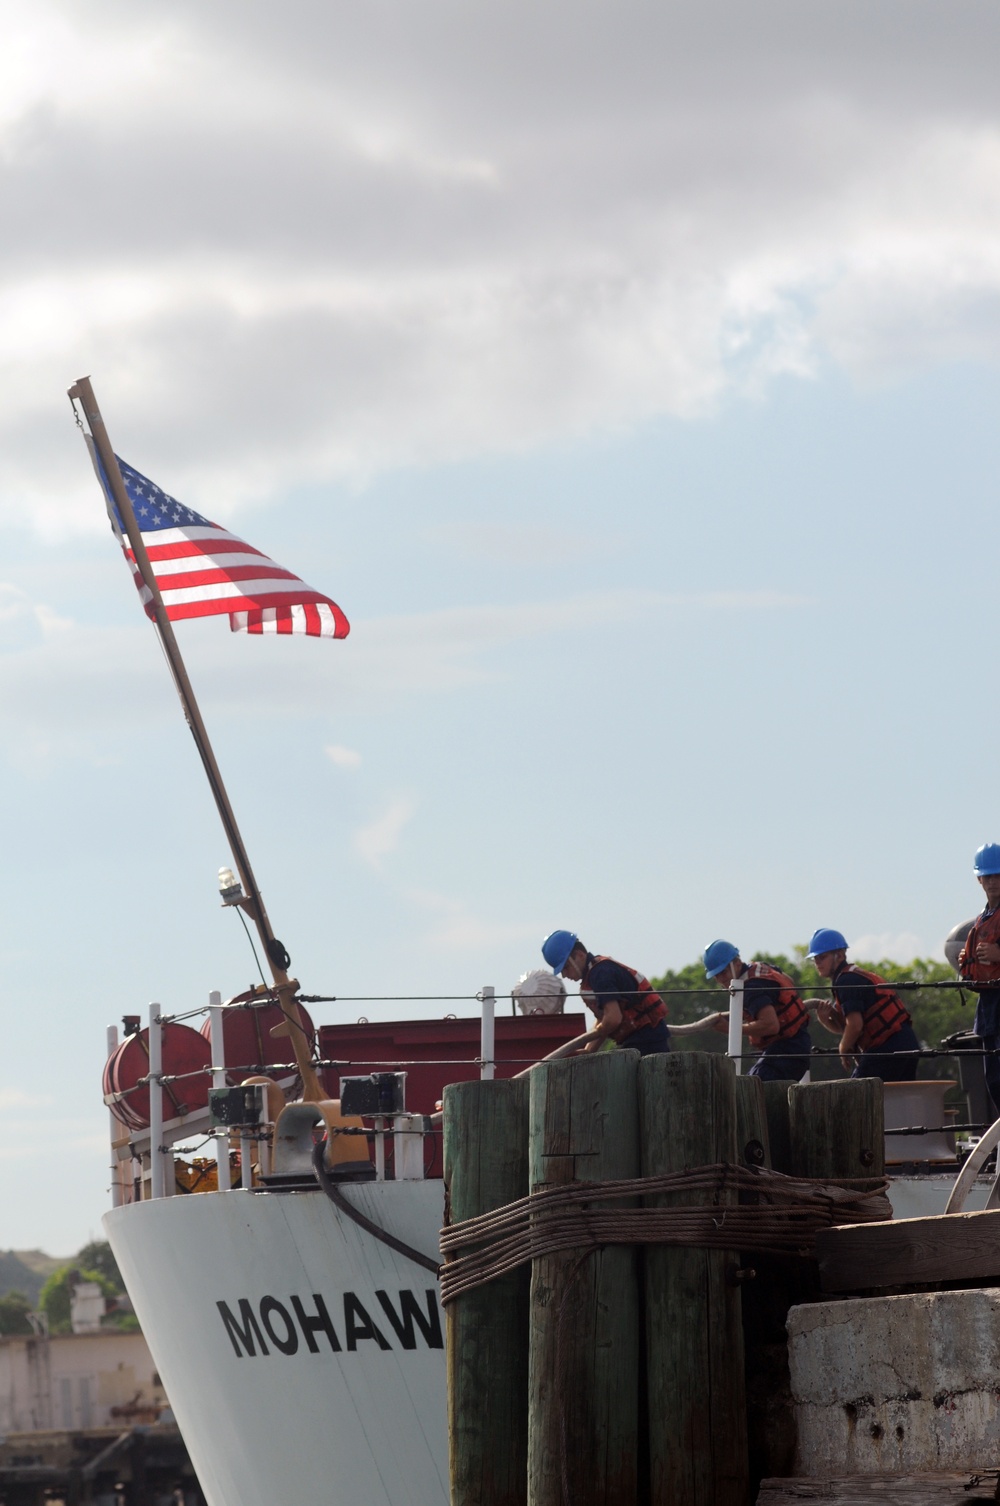 MSST Boston Greets Two Coast Guard Cutters, conducts training on Guantanamo Bay